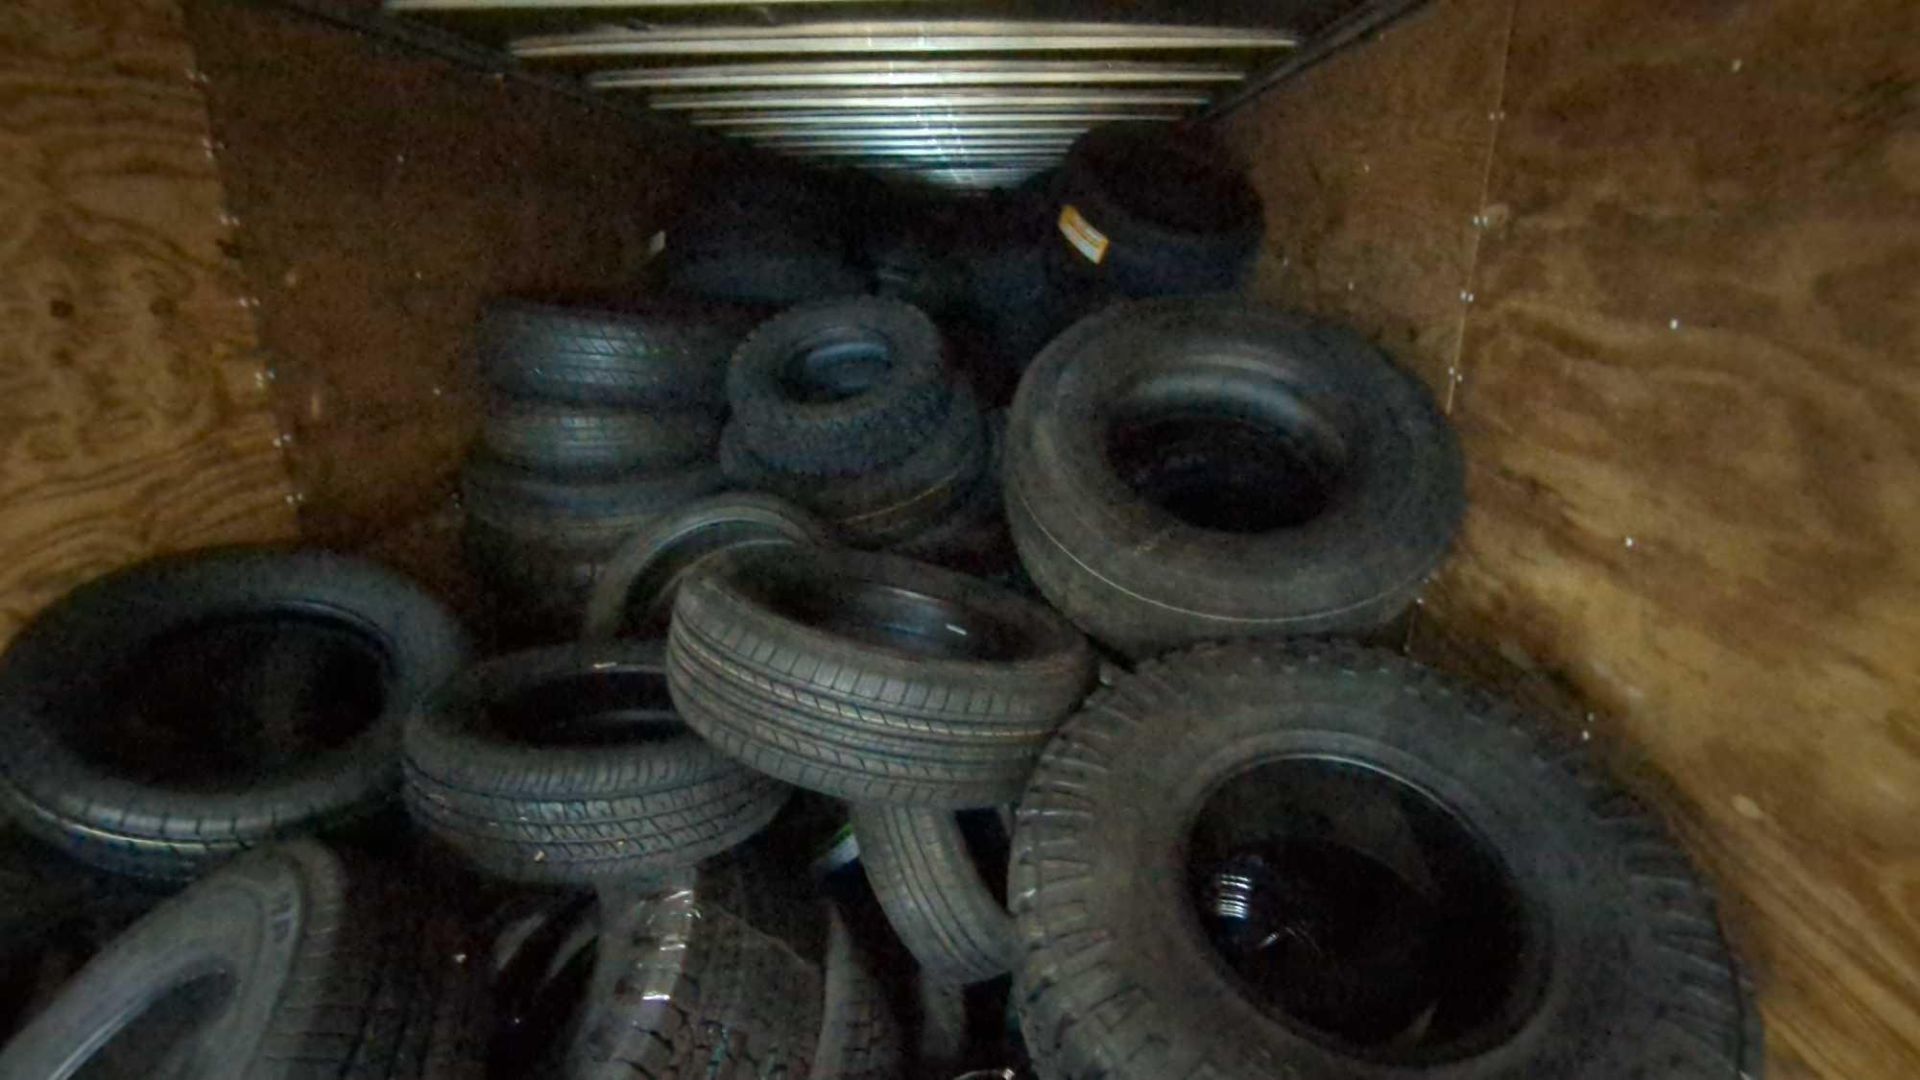 Semi of Tires - Image 7 of 9